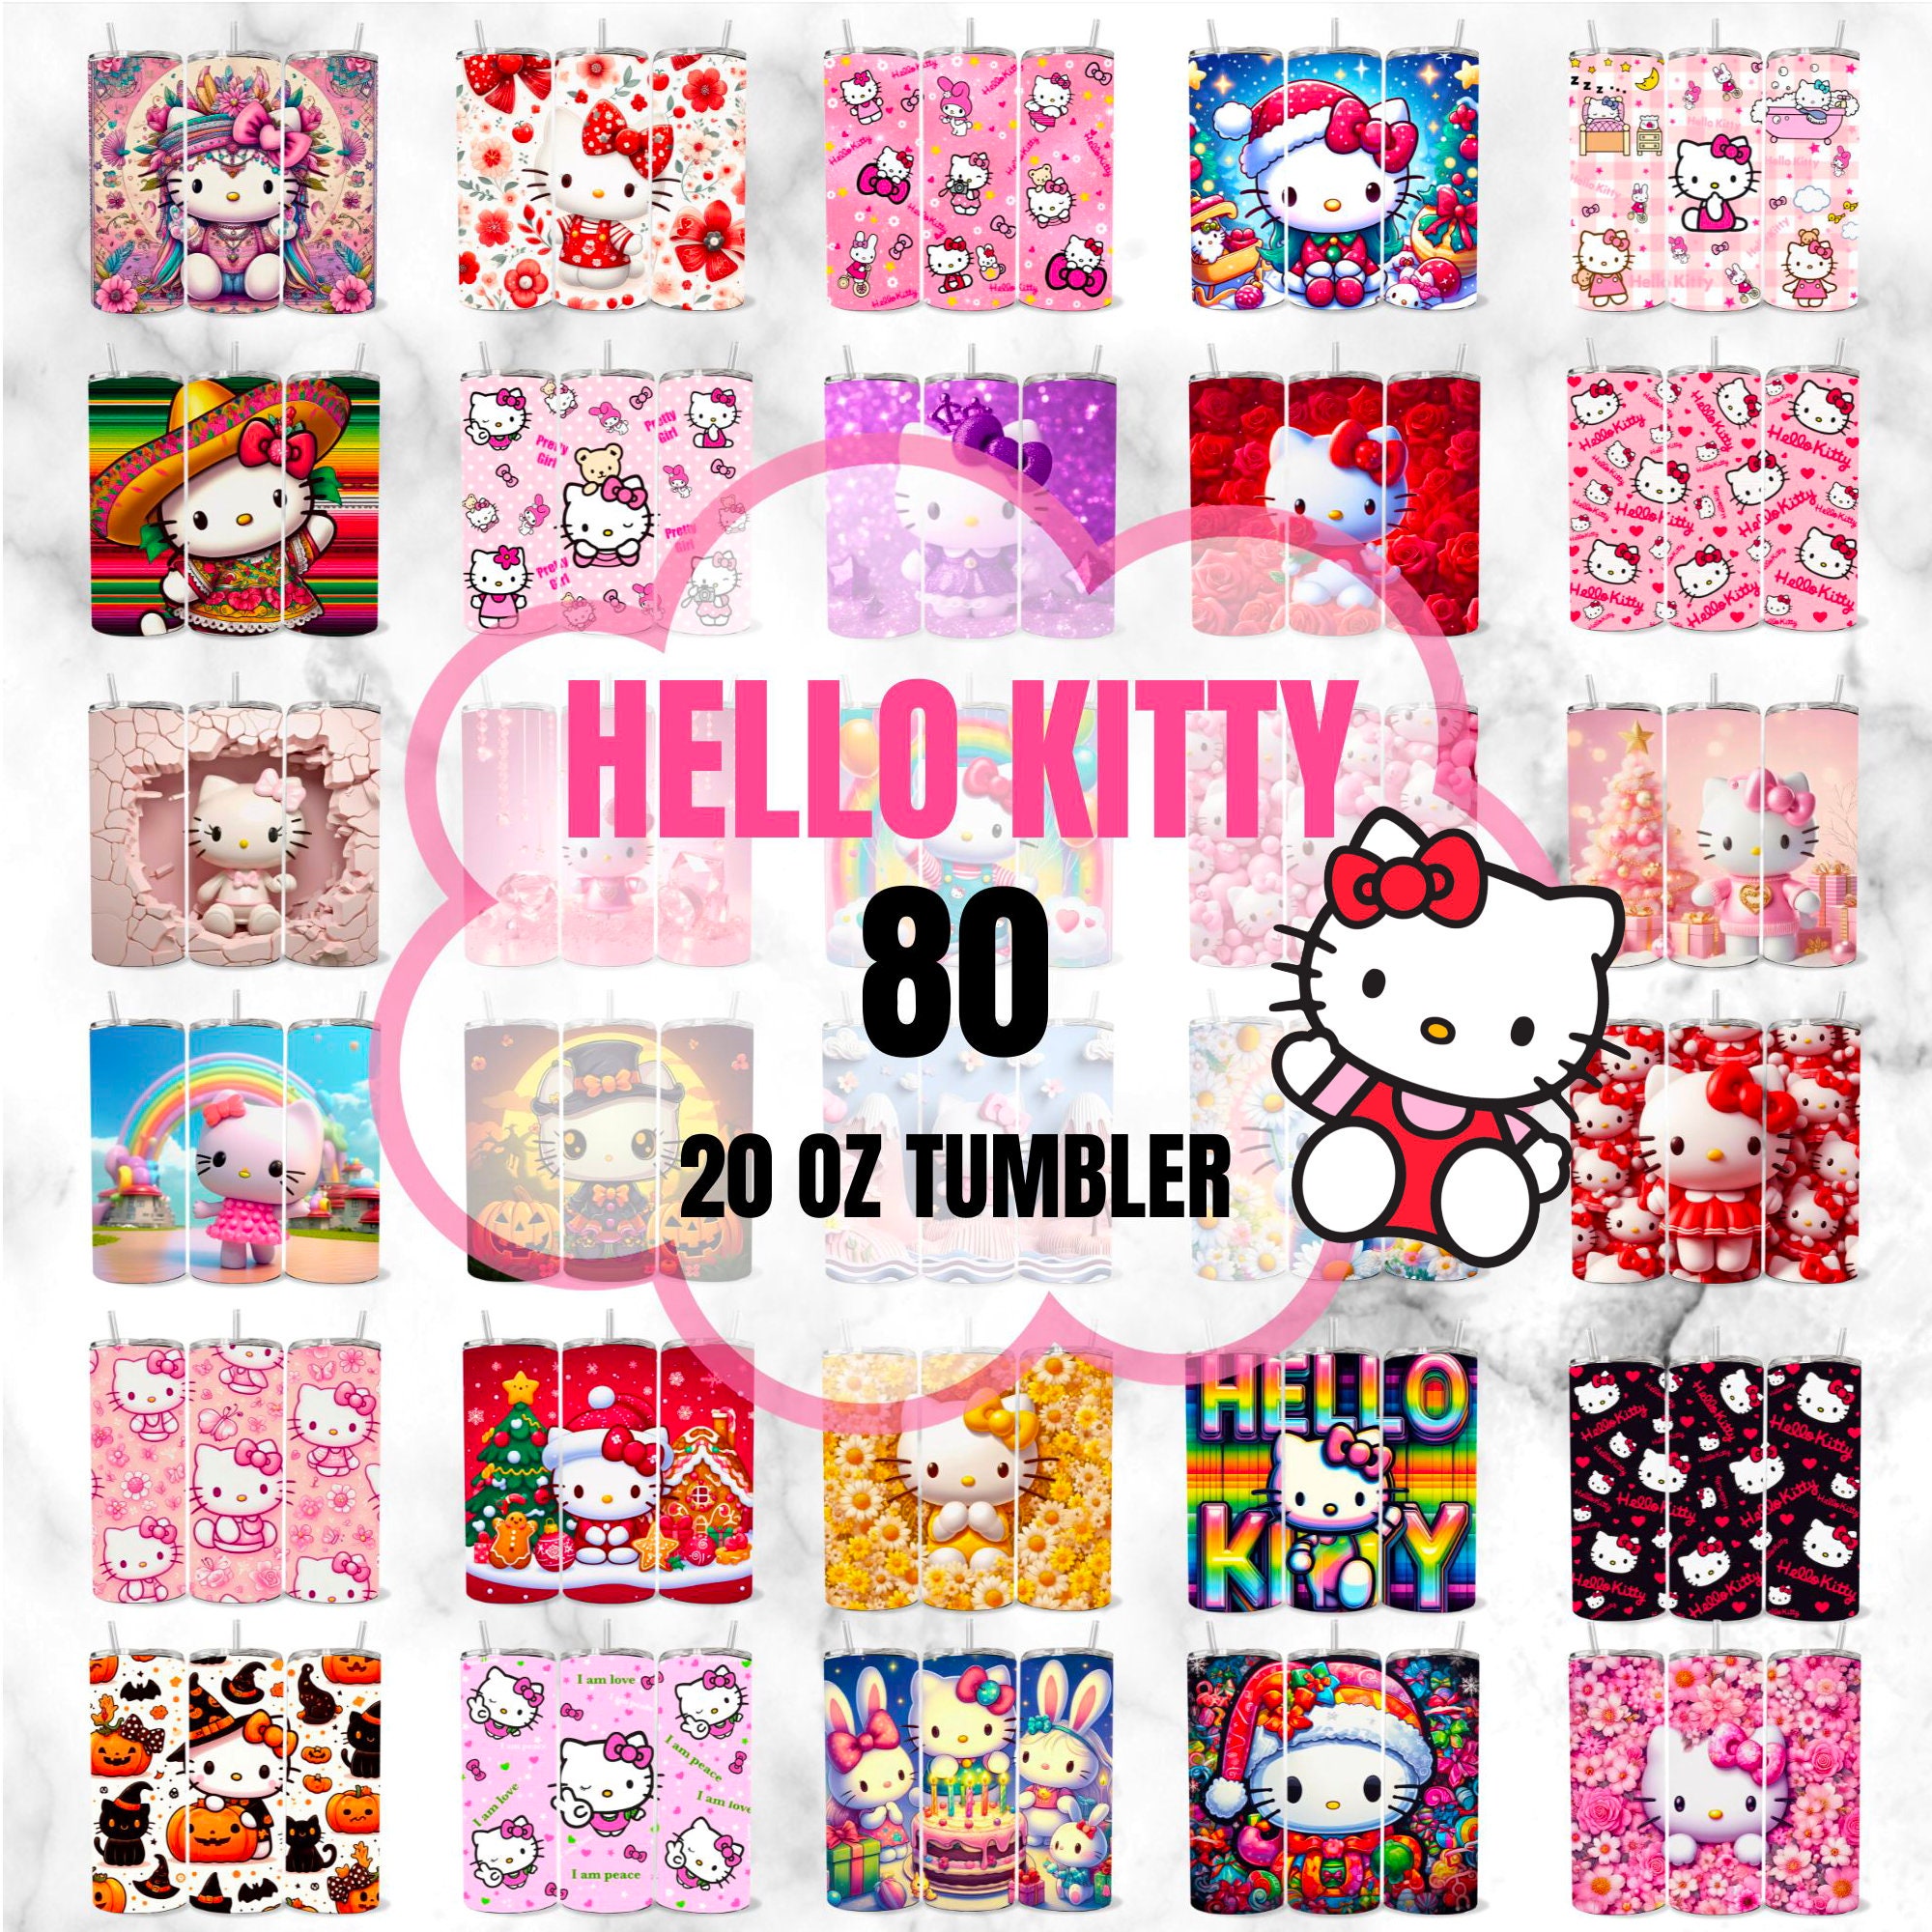 3D Acrylic Hello Kitty Wall Decoration Sticker for Baby Room, Bedroom, Game  Room, Etc. variation A 